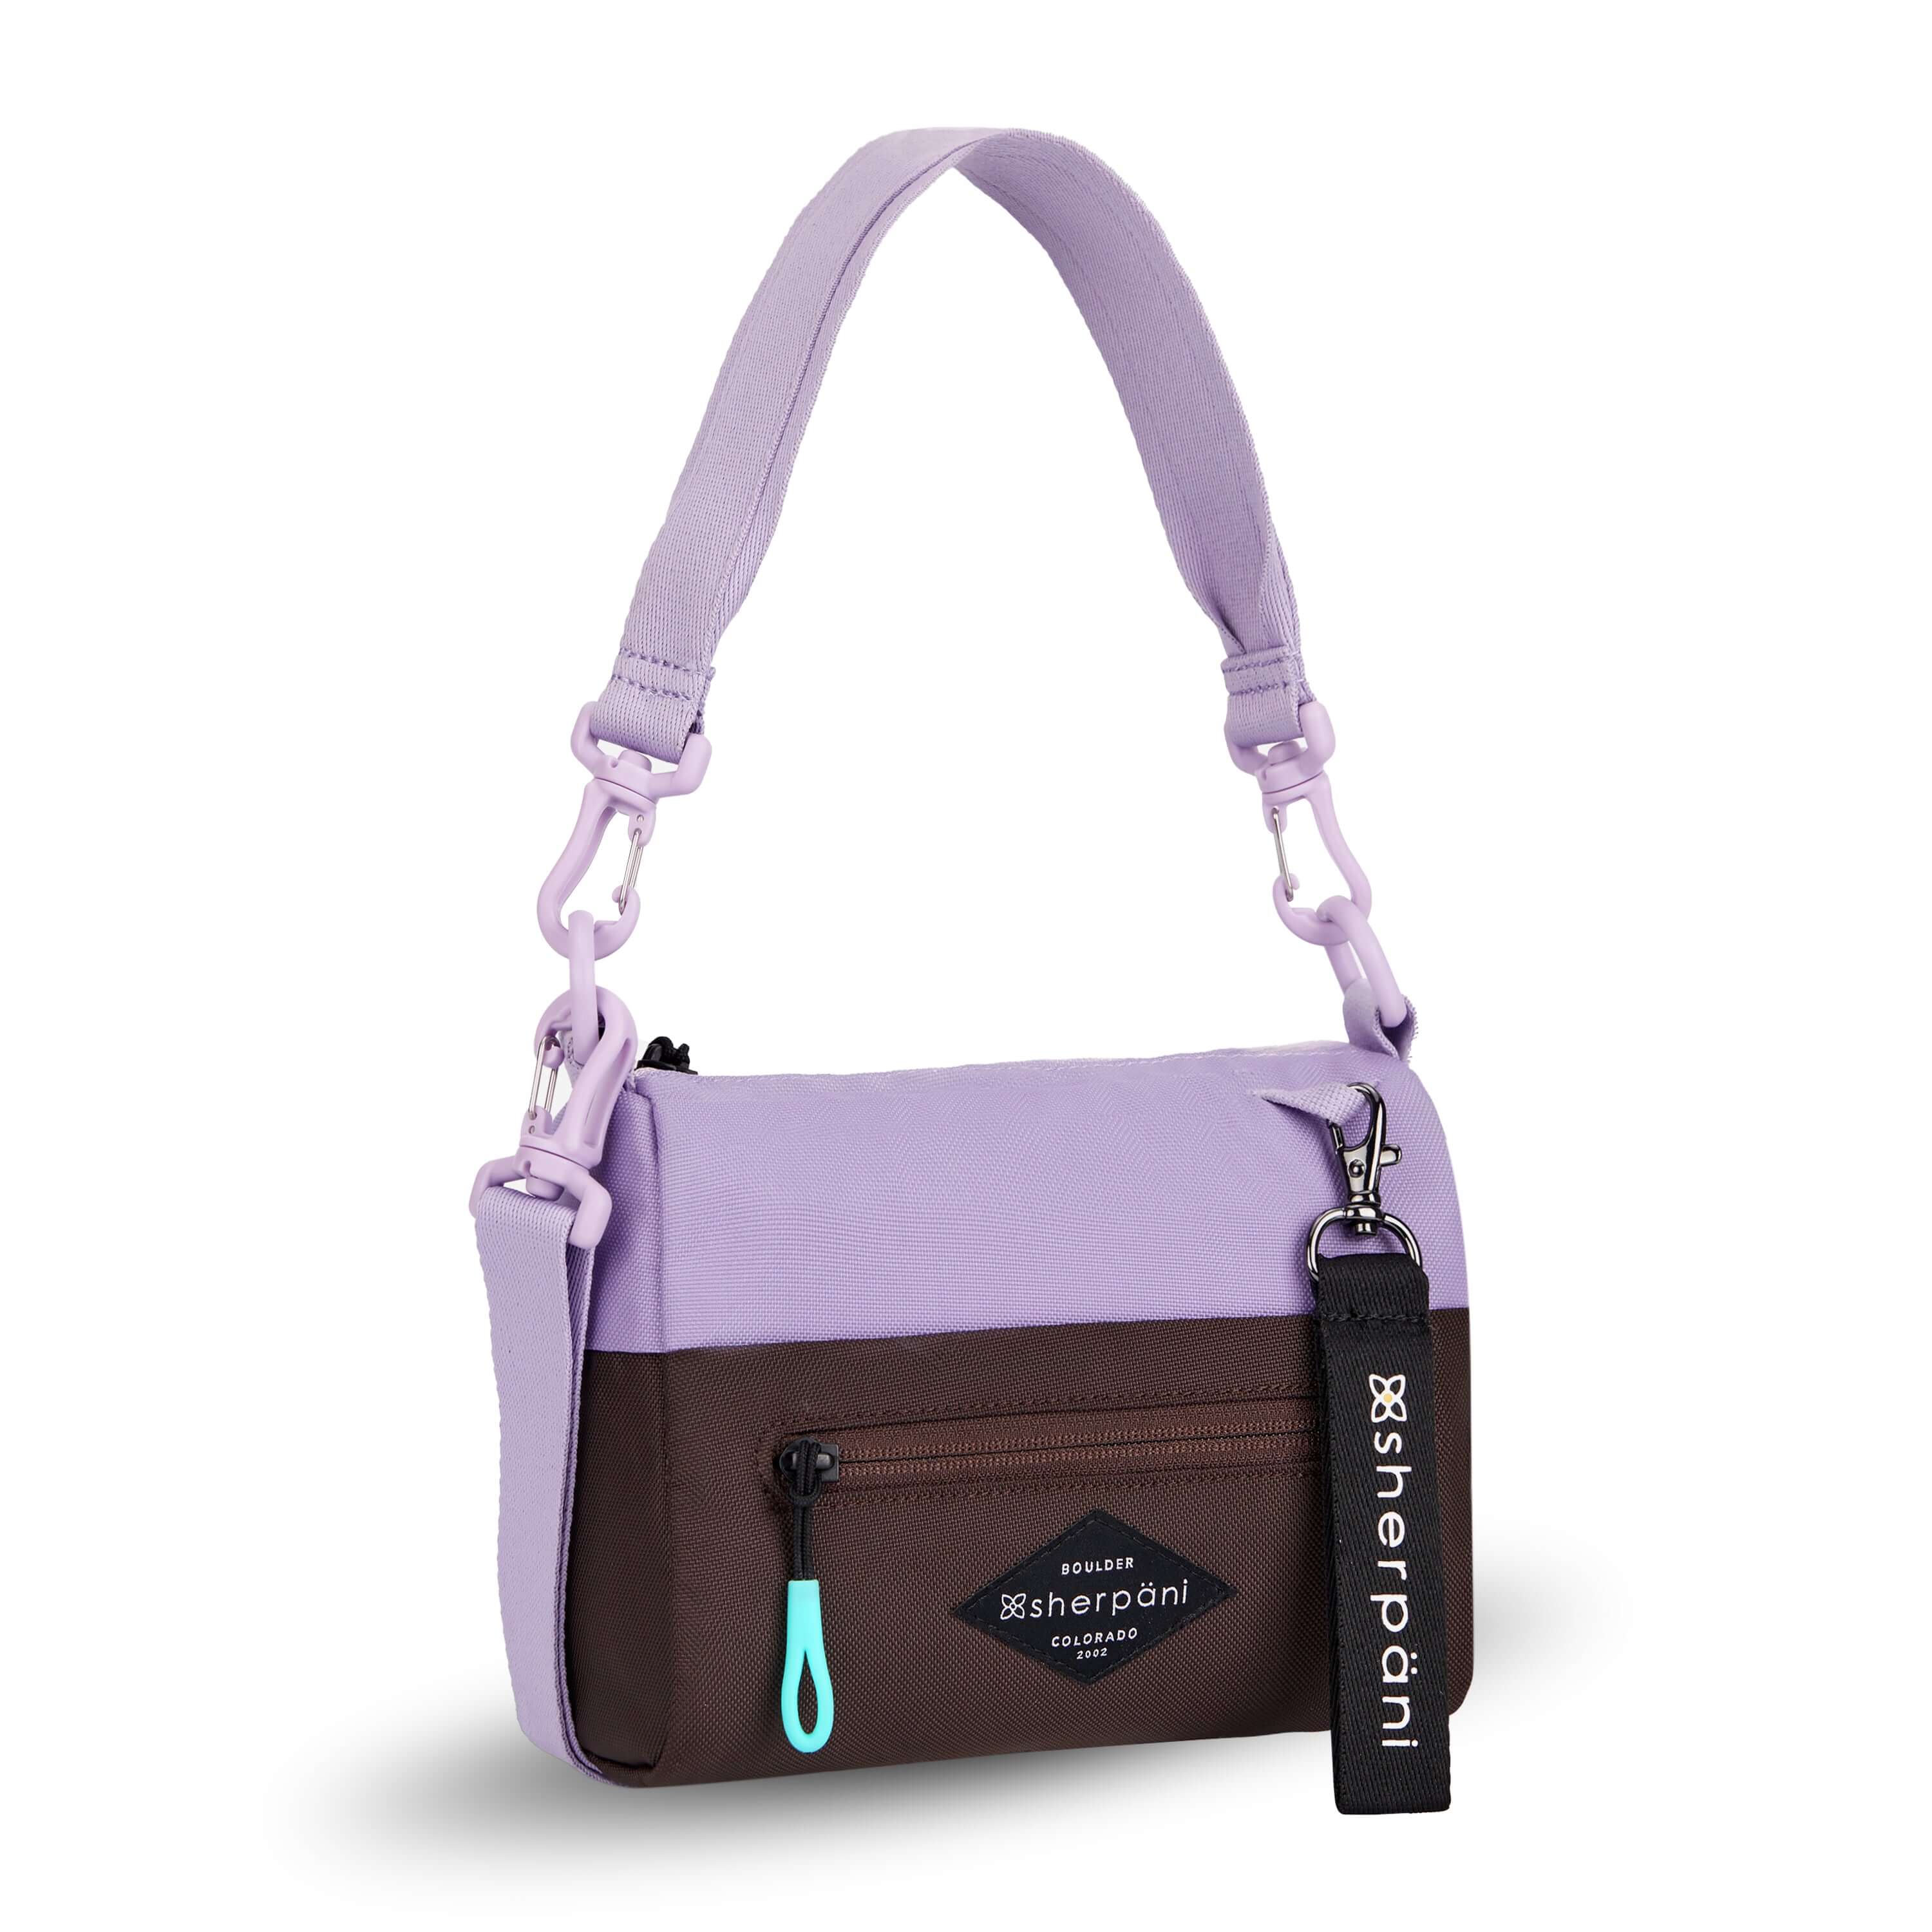 Angled front view of Sherpani's purse, the Skye in Lavender. It is two-toned, the top half of the bag is lavender and the bottom half of the bag is brown. There is an external zipper compartment with an easy-pull zipper accented in aqua. There is a branded Sherpani keychain clipped to the upper right corner. The bag has a detachable short strap and a longer detachable/adjustable crossbody strap. #color_lavender